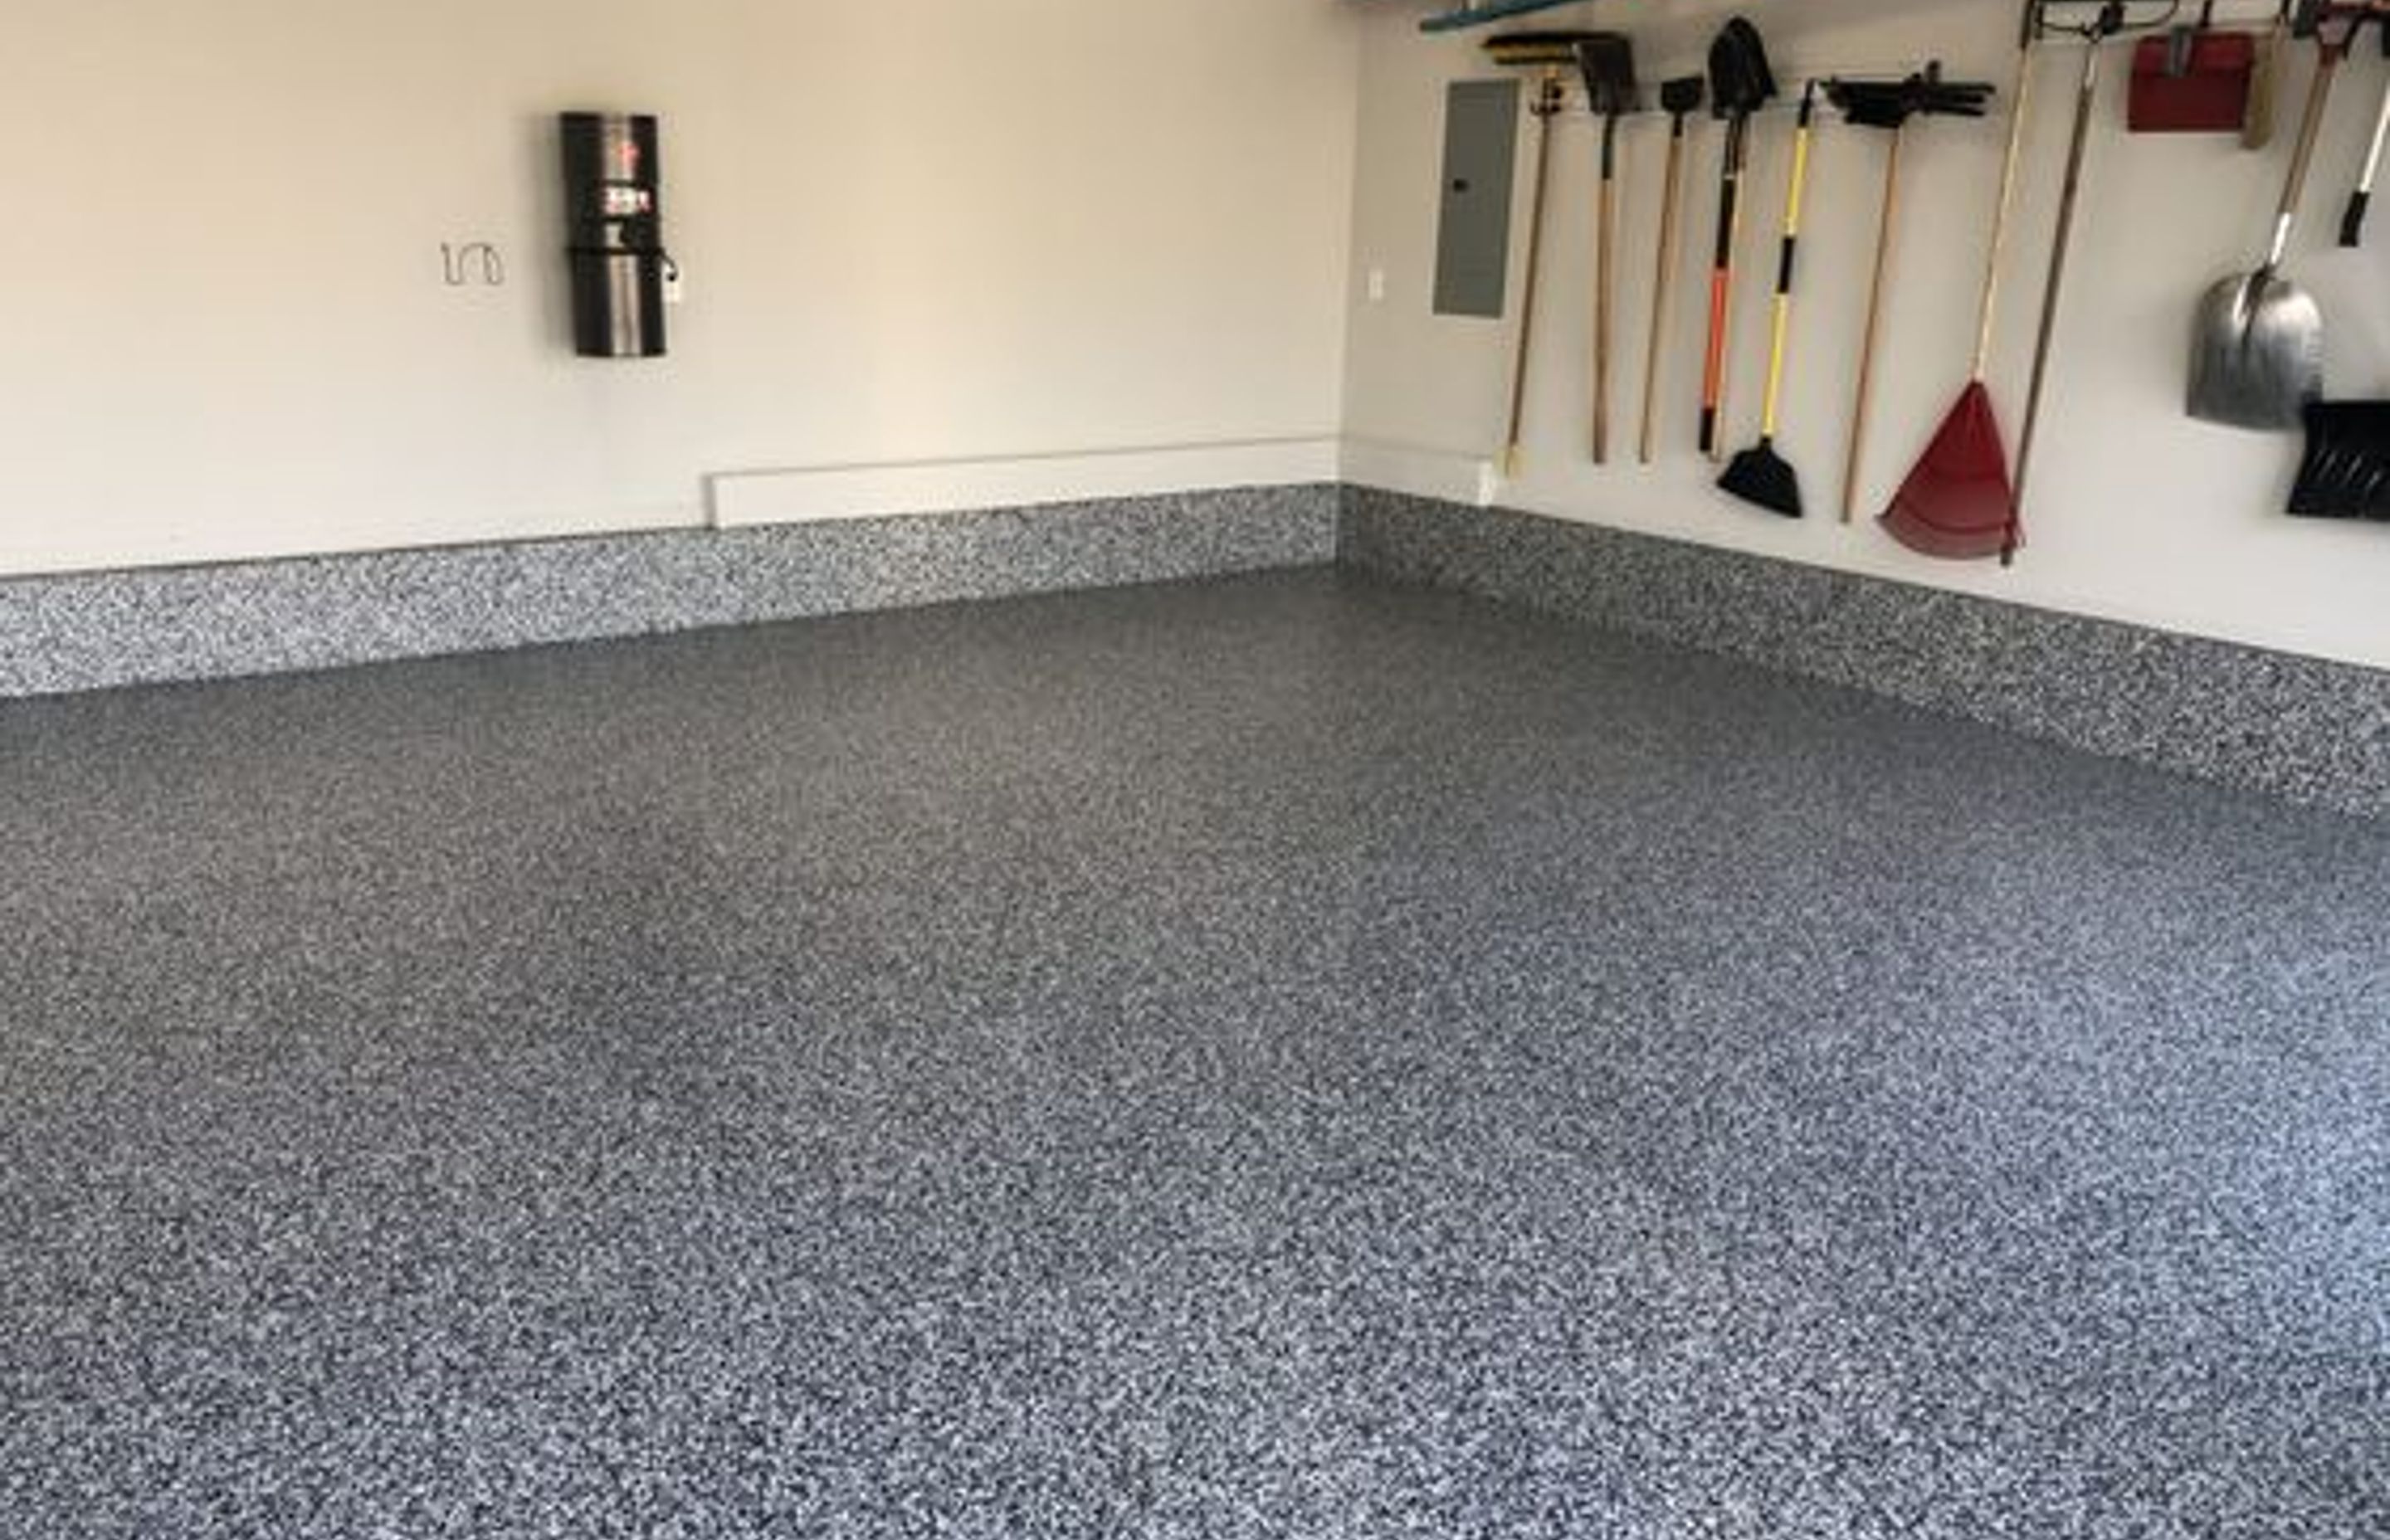 How to Use Garage Floor Paint to Transform Your Home